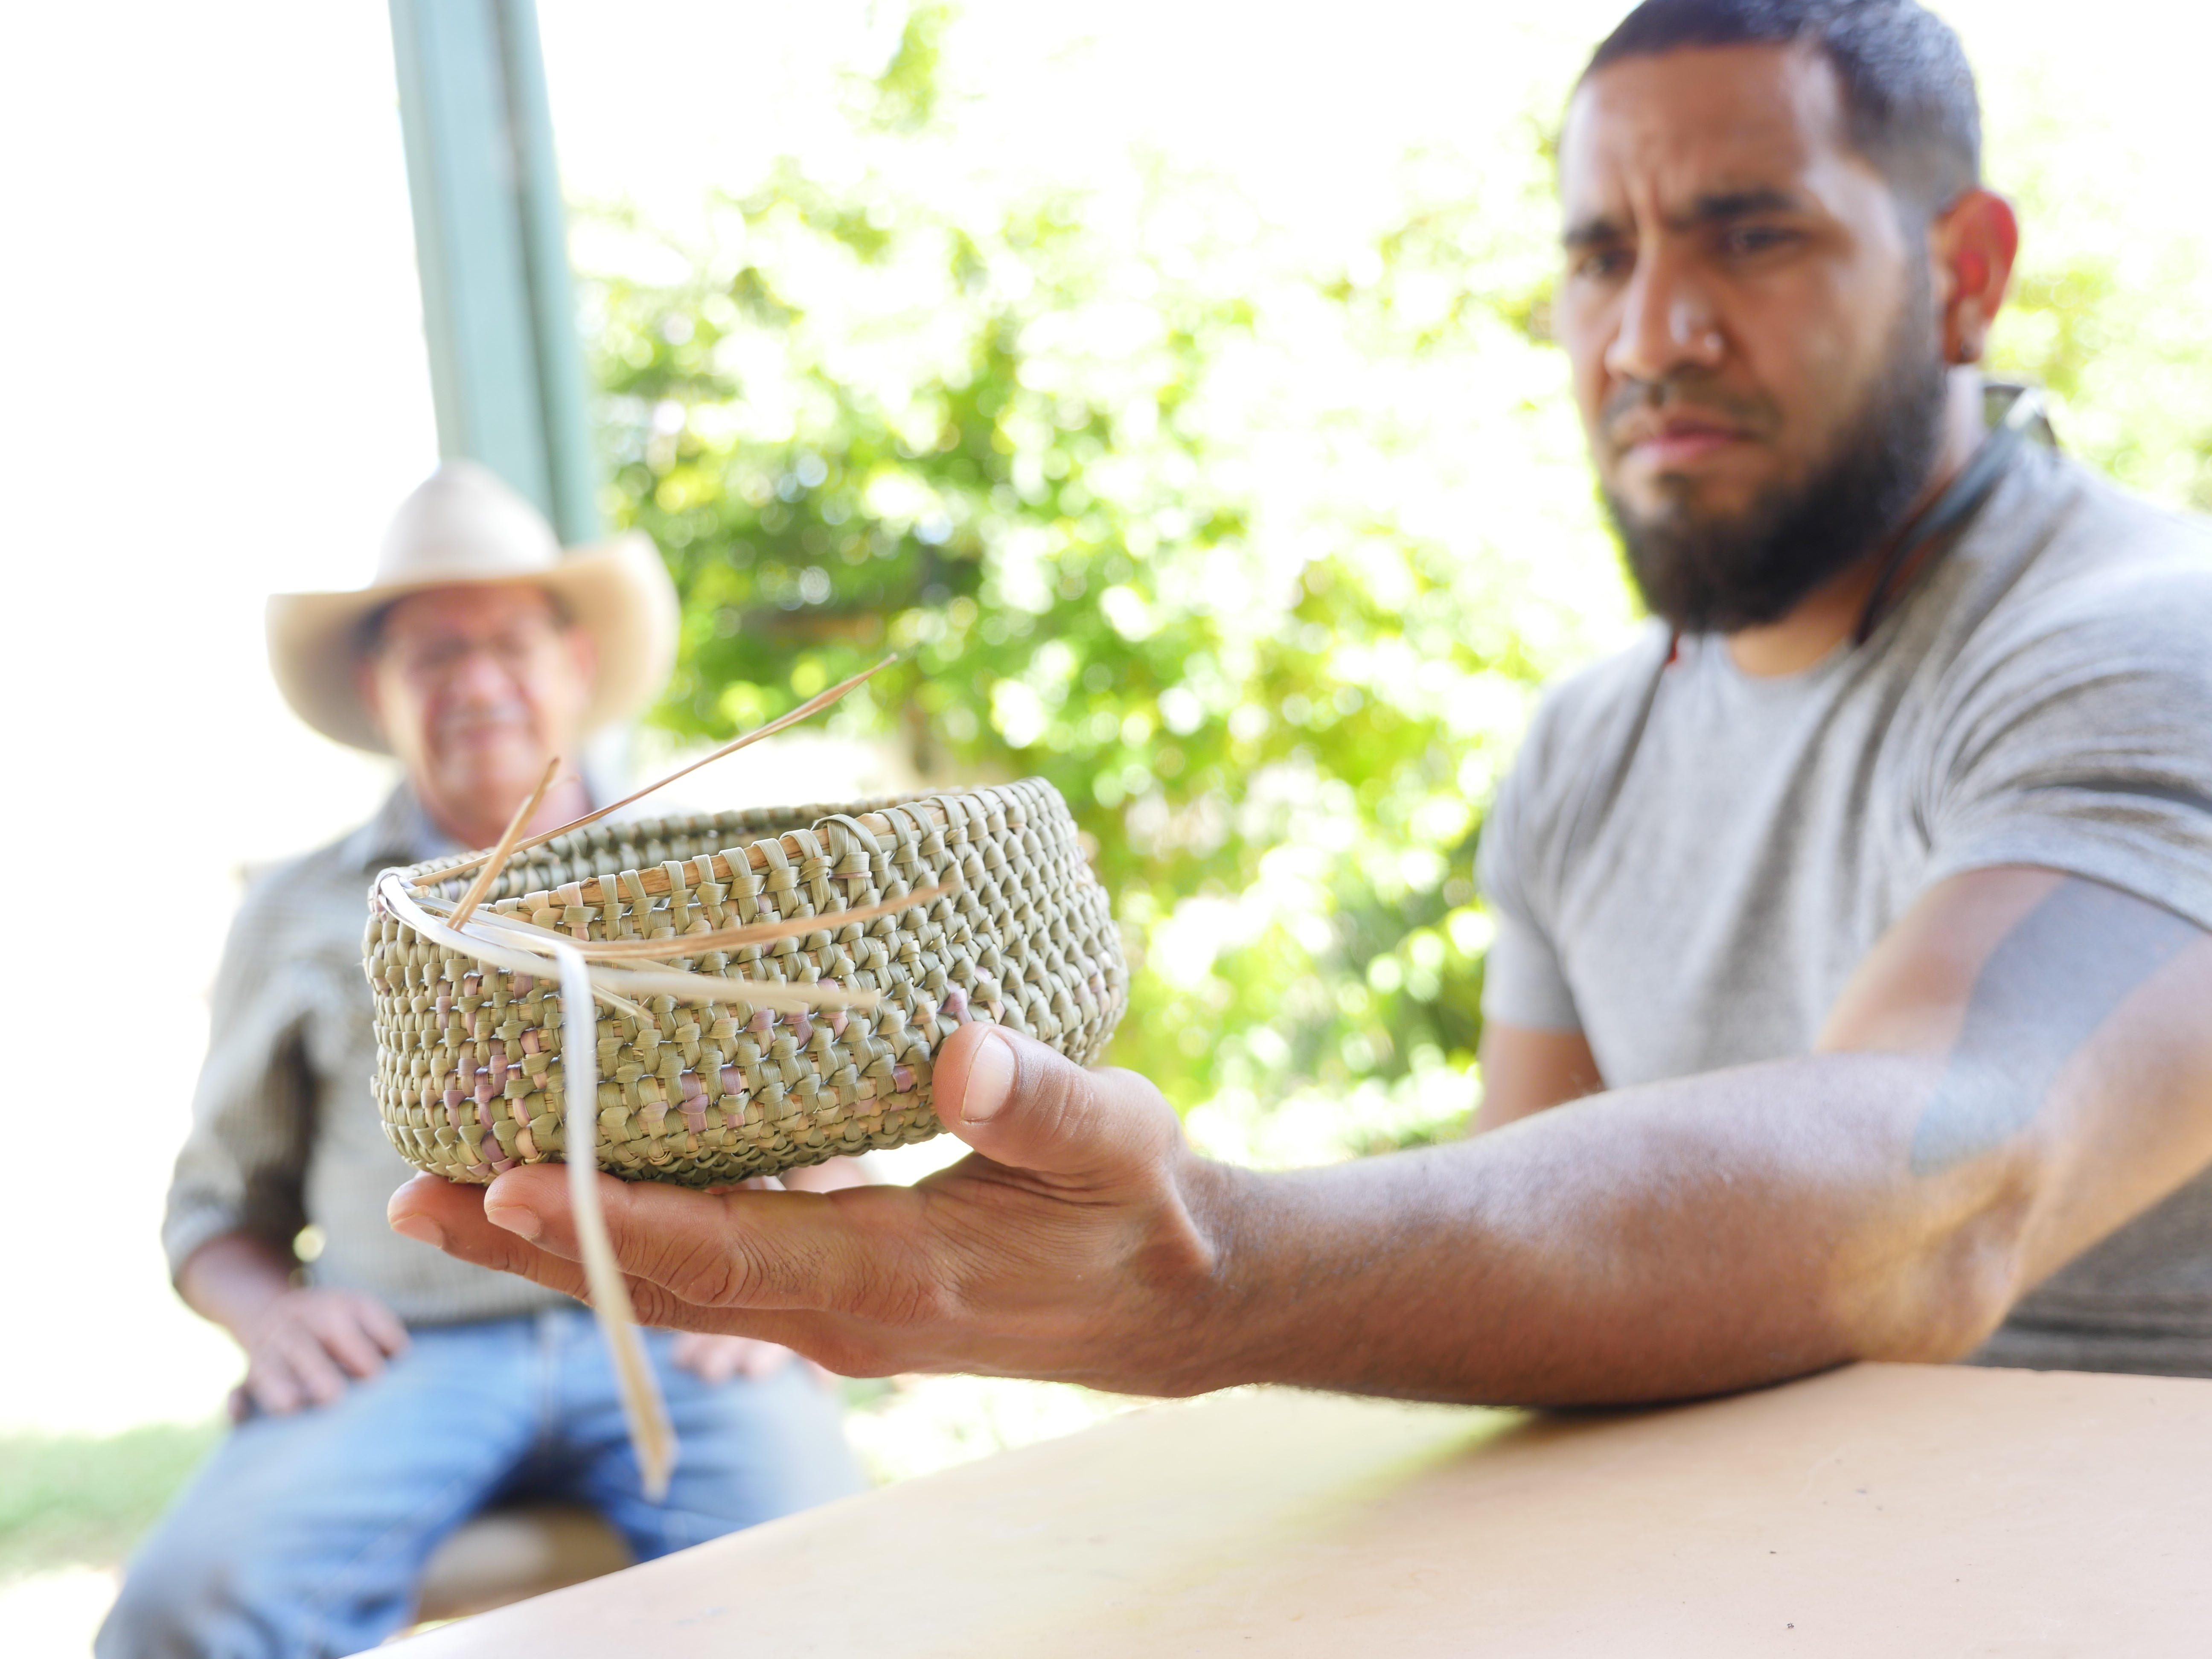 young indigenous man holding woven basket with older indigenous man sitting in the background, both men are out of focus